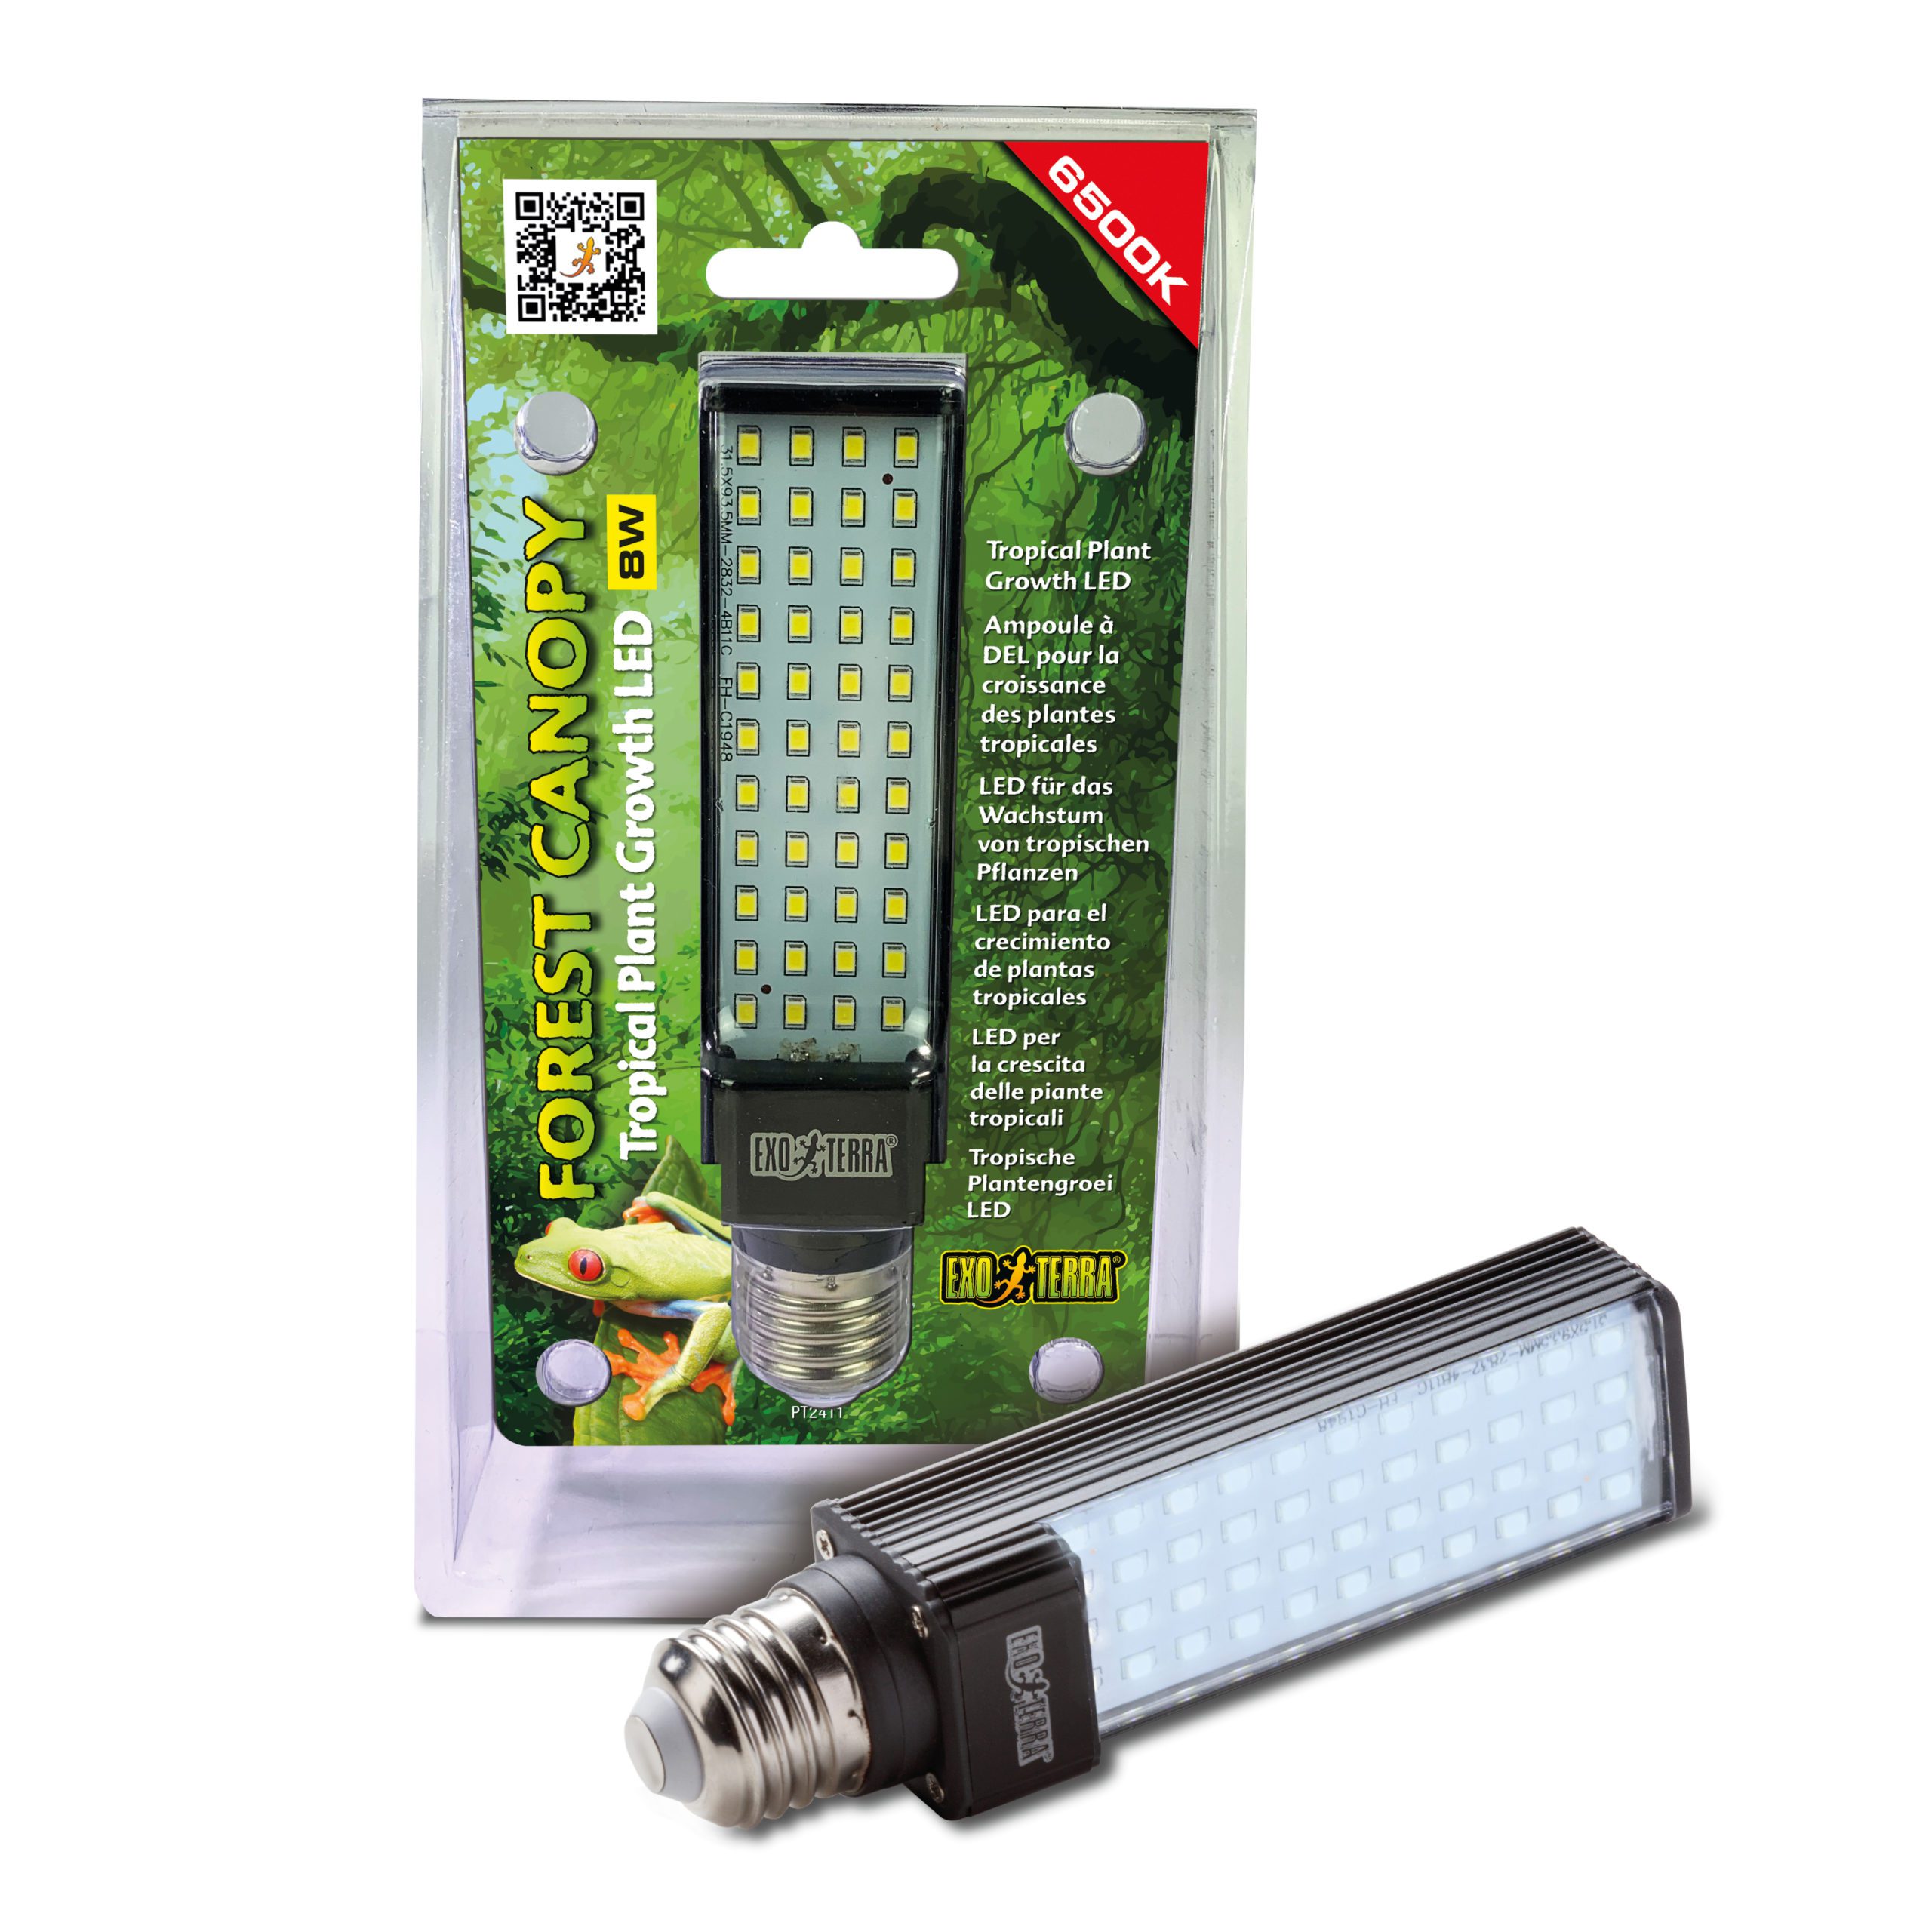 ET Forest Canopy LED 8W, PT2411